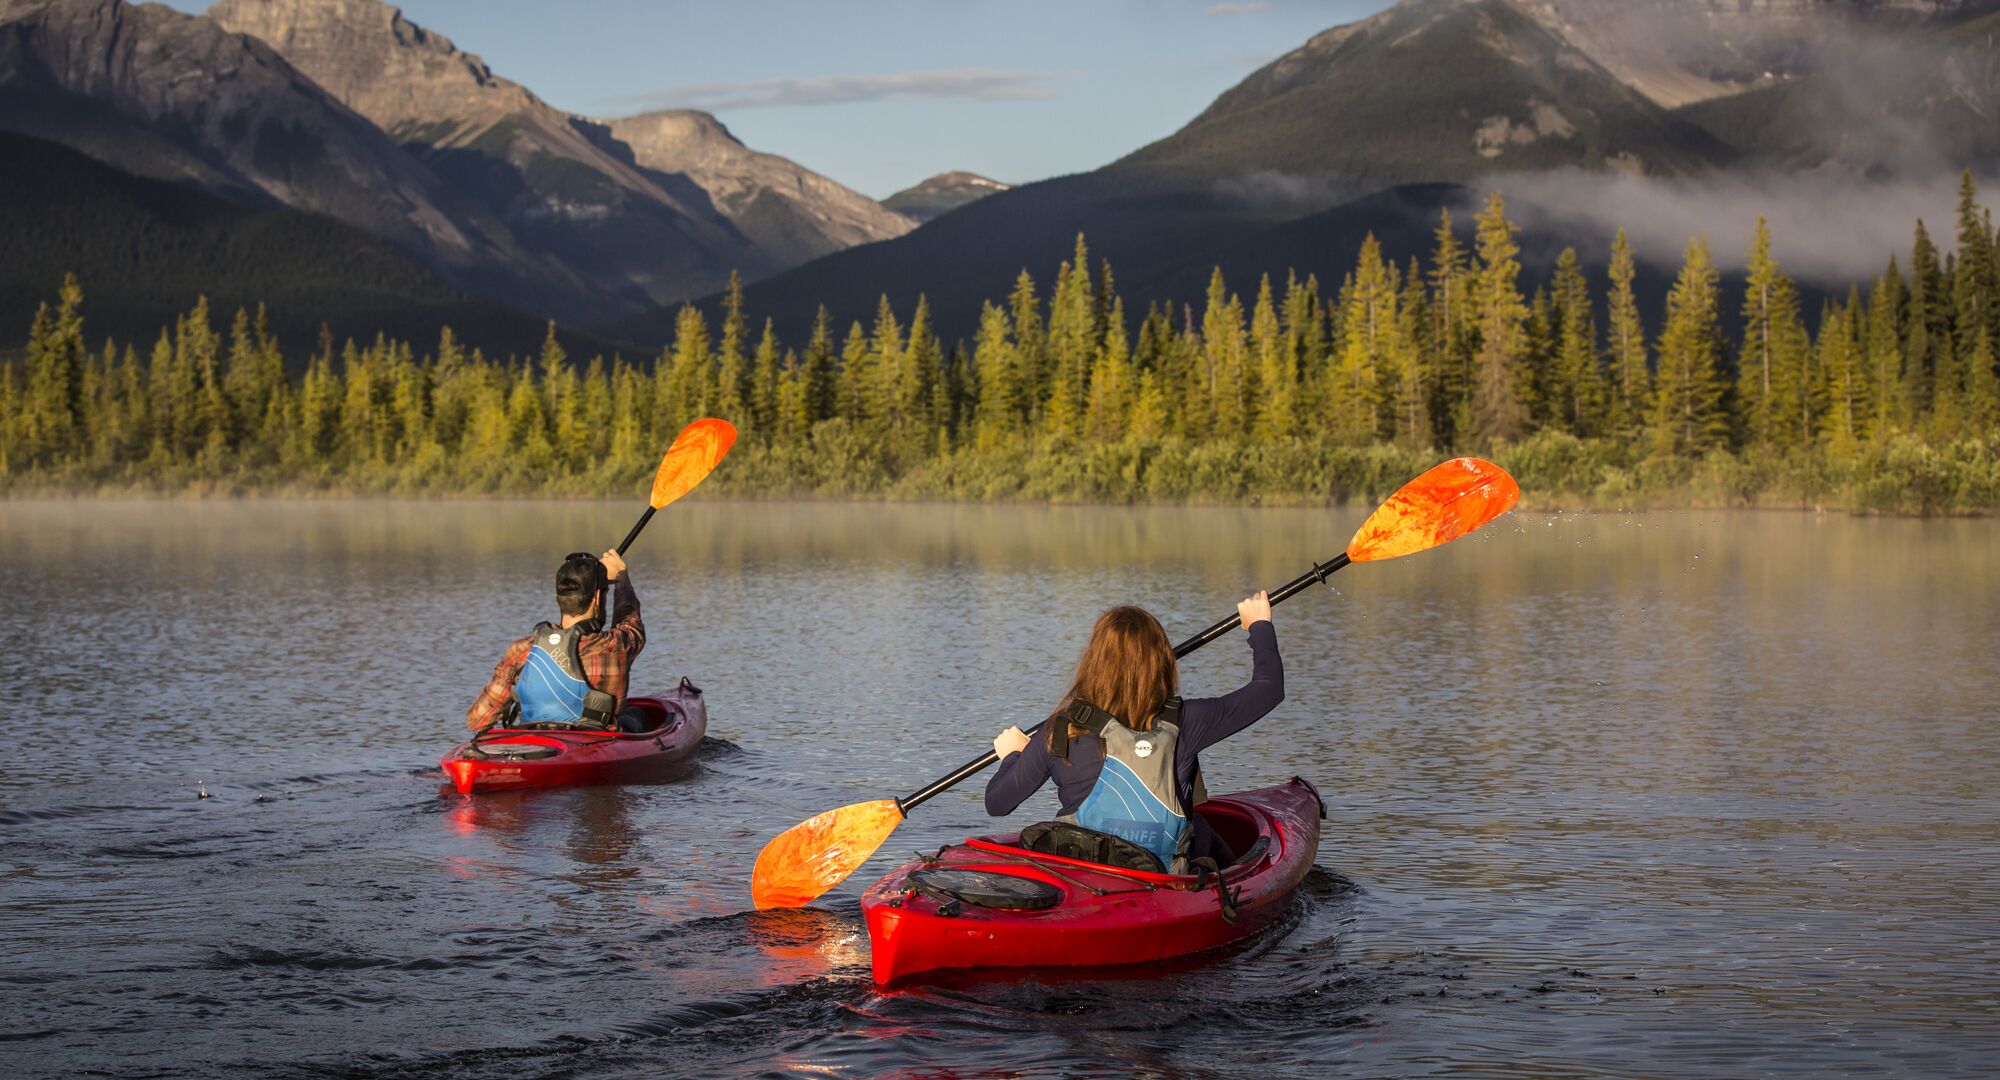 Two people kayaking on Vermilion Lakes in Banff National Park